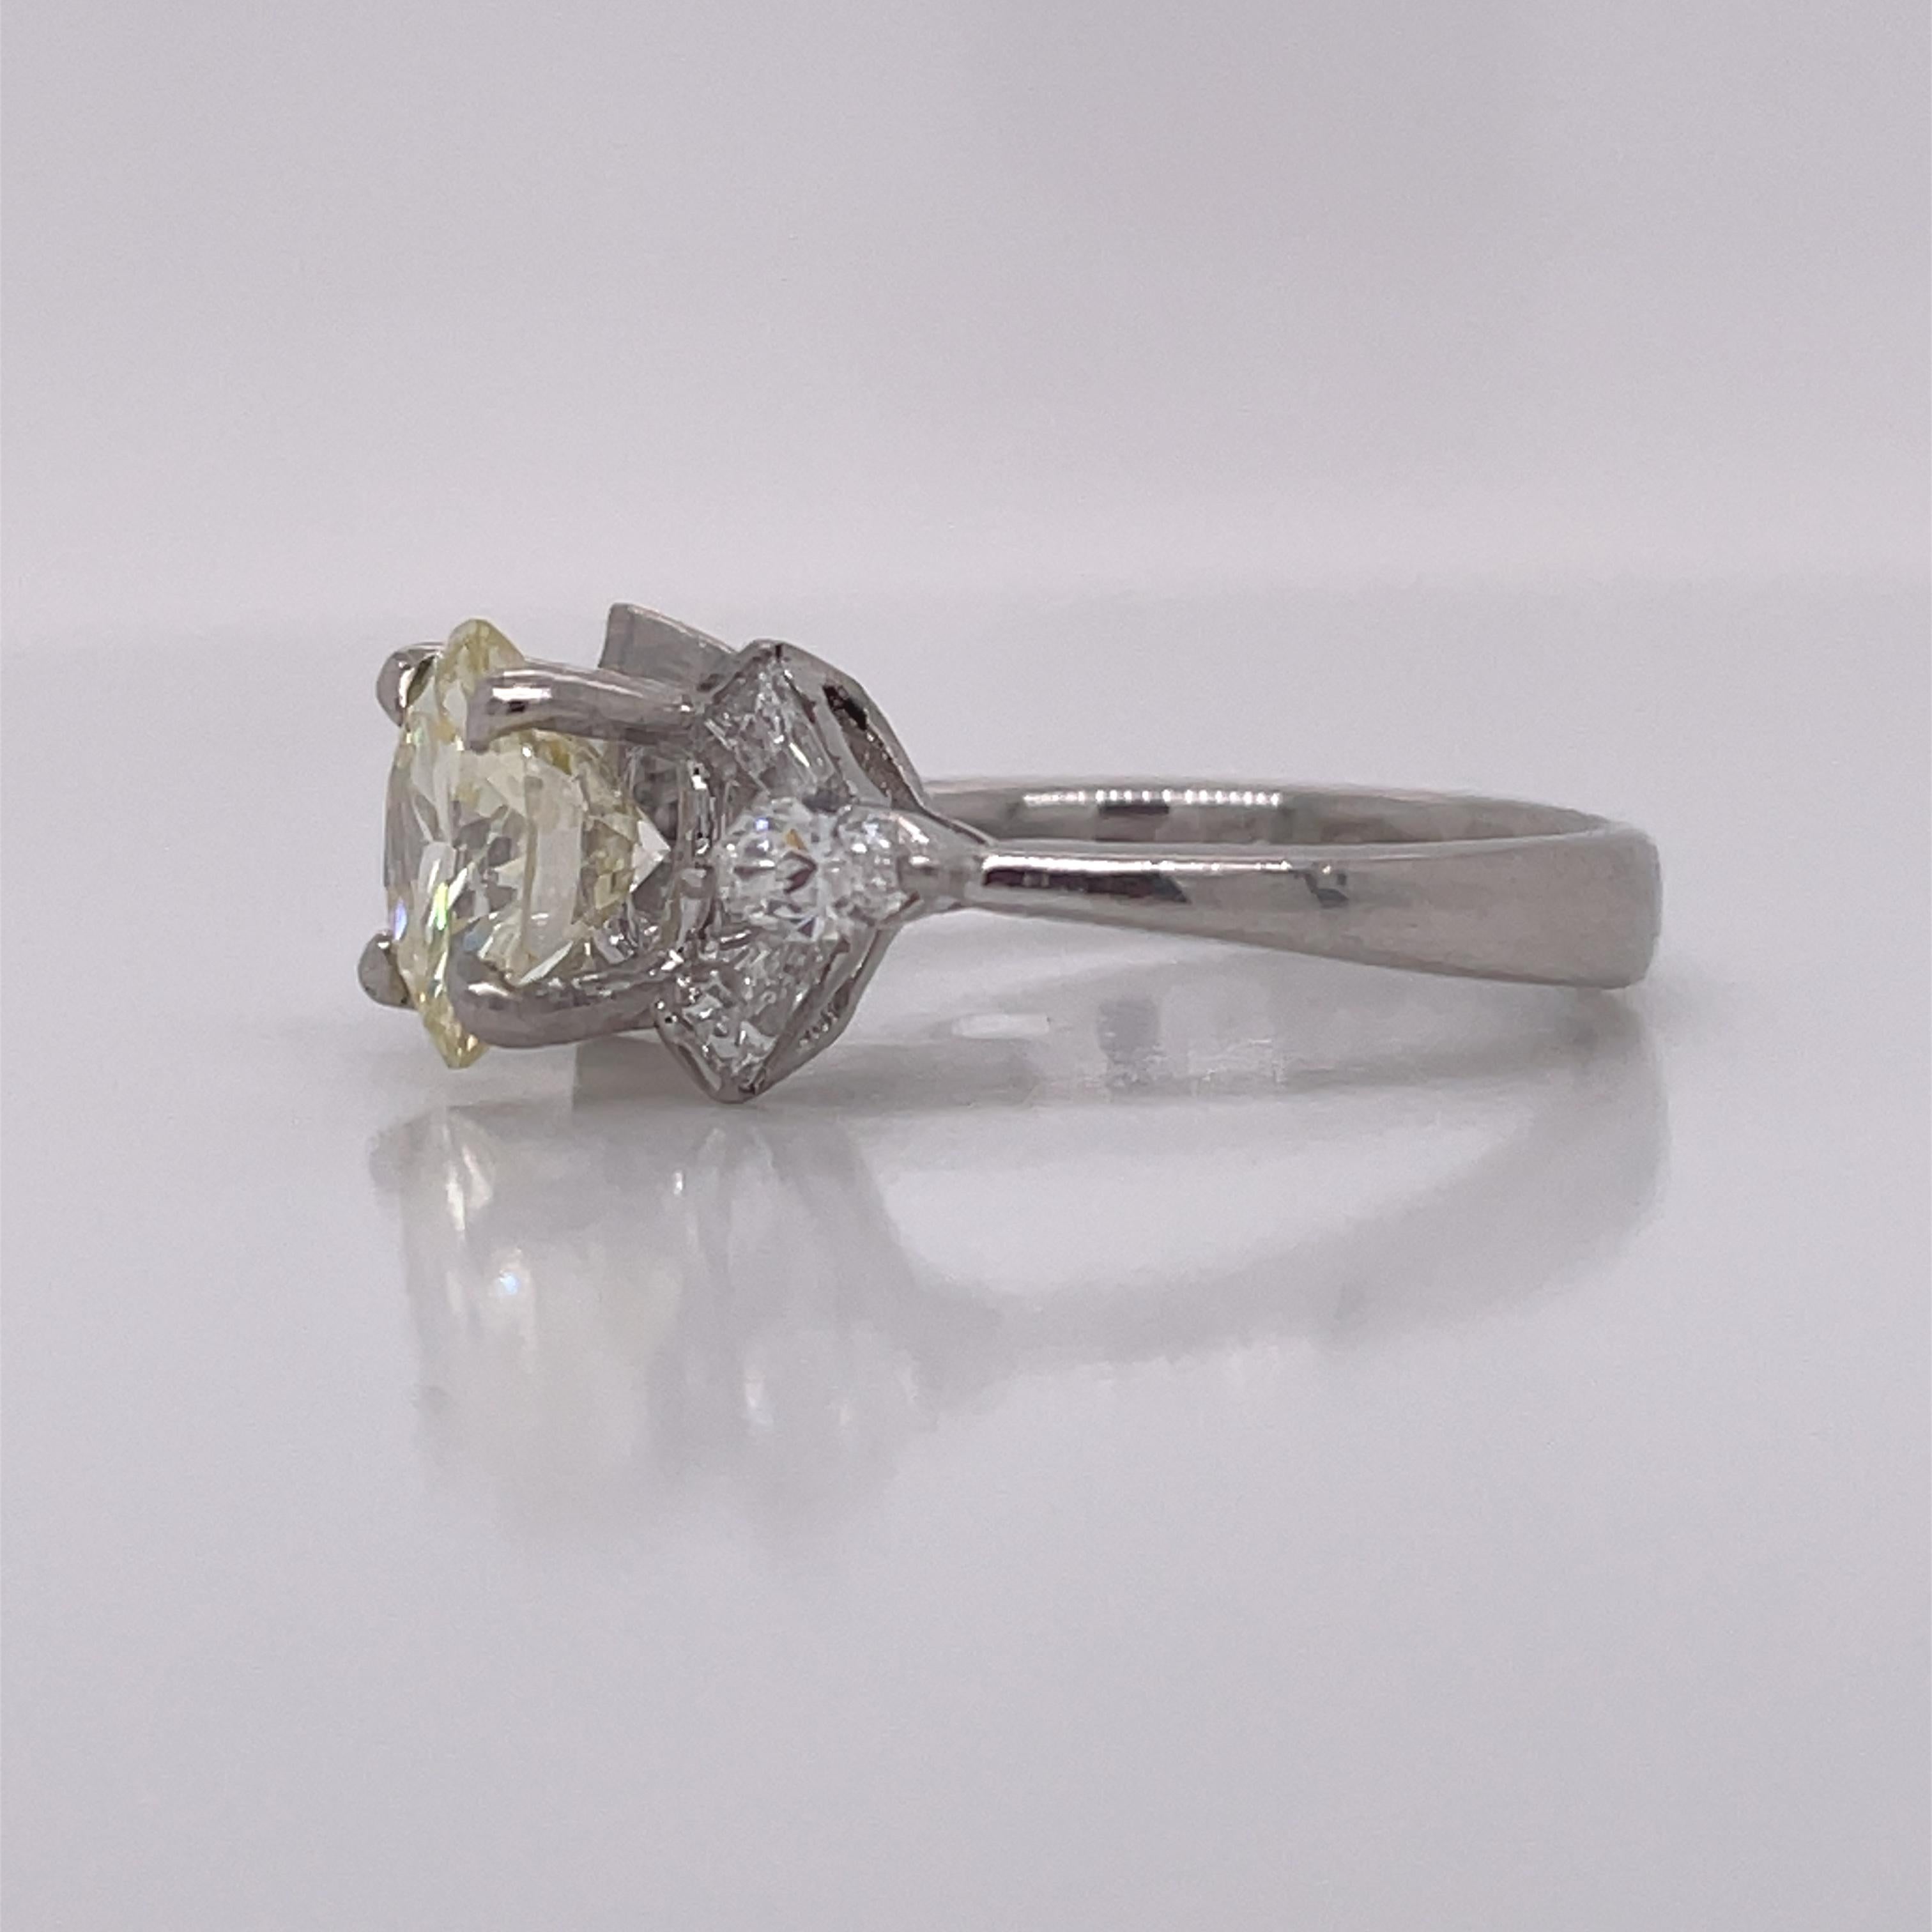 This is a lovely 1950s Platinum Diamond Ring featuring gorgeous tapered baguettes and marquise cut diamonds! It is hard not to fall in love with this stunning ring! From her gorgeous 1.75ct center down to her gorgeous marquise and tapered baguettes